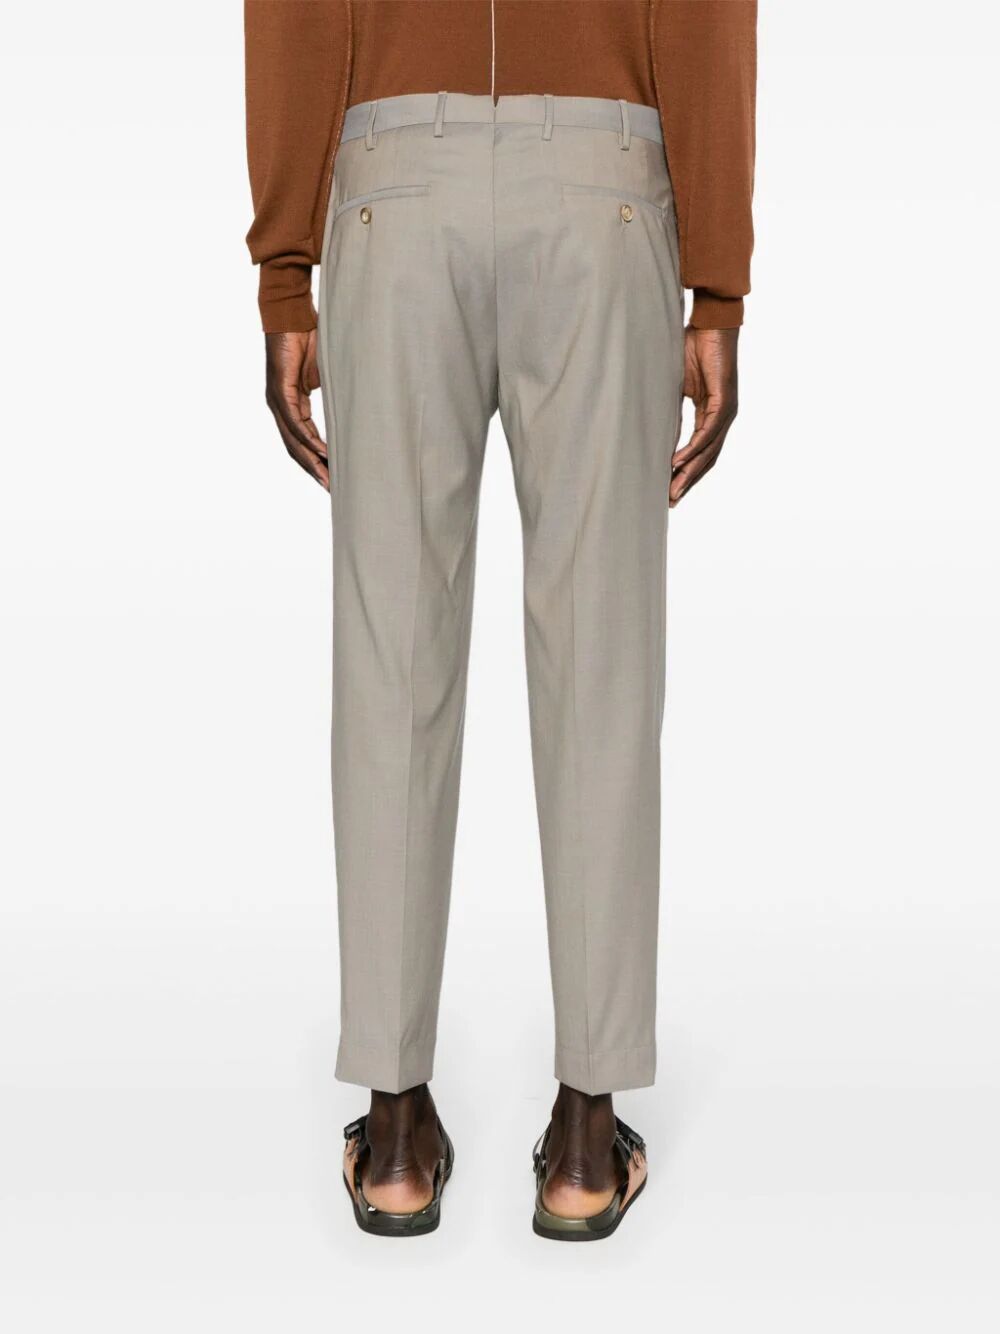 Model R54 Tapered Fit Trousers